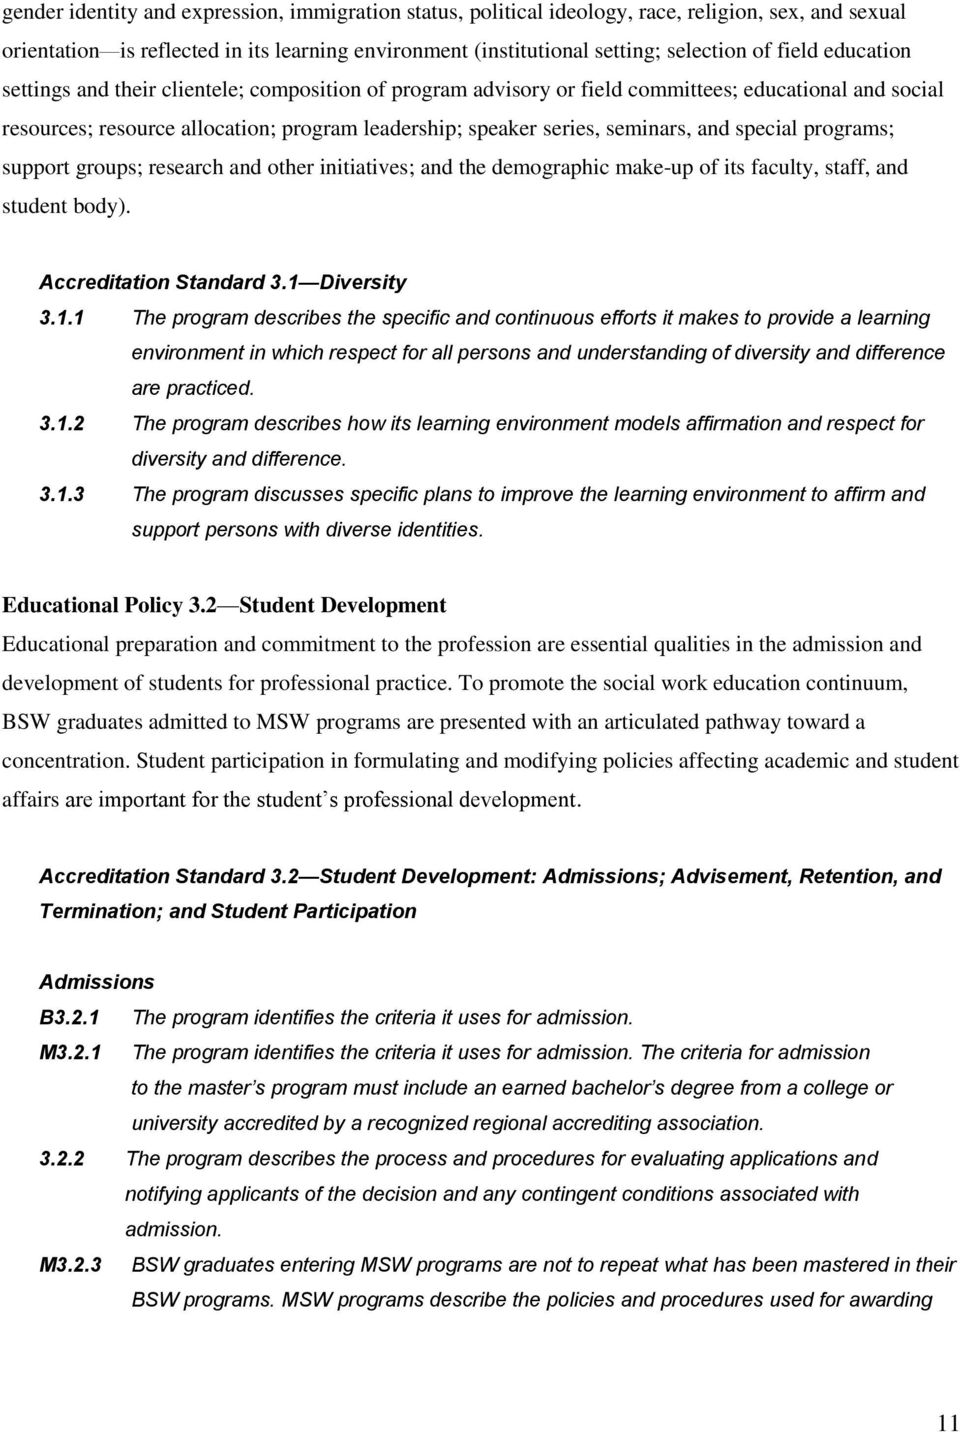 special programs; support groups; research and other initiatives; and the demographic make-up of its faculty, staff, and student body). Accreditation Standard 3.1 